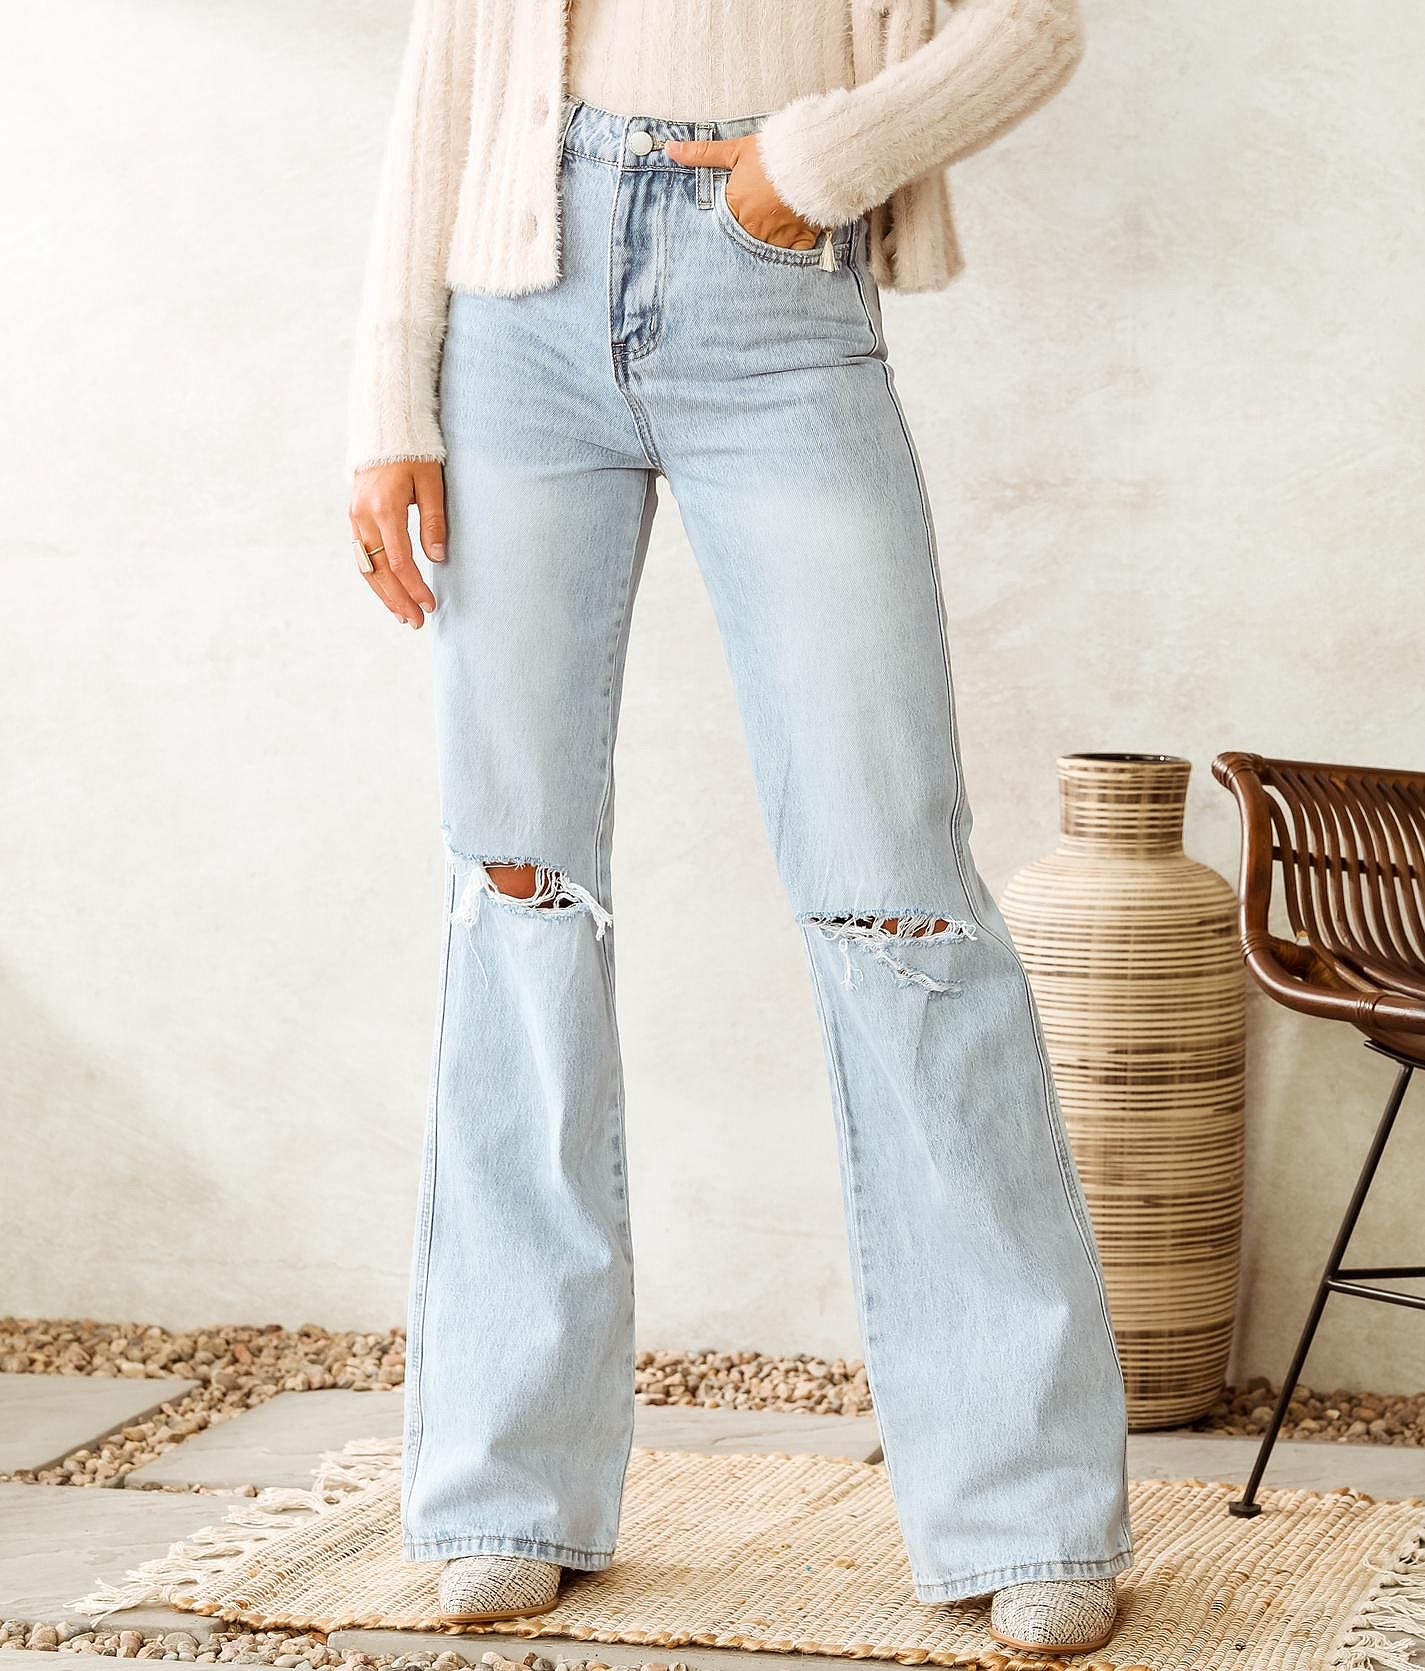 16 Trendy Denim Styles to Try This Fall | Who What Wear